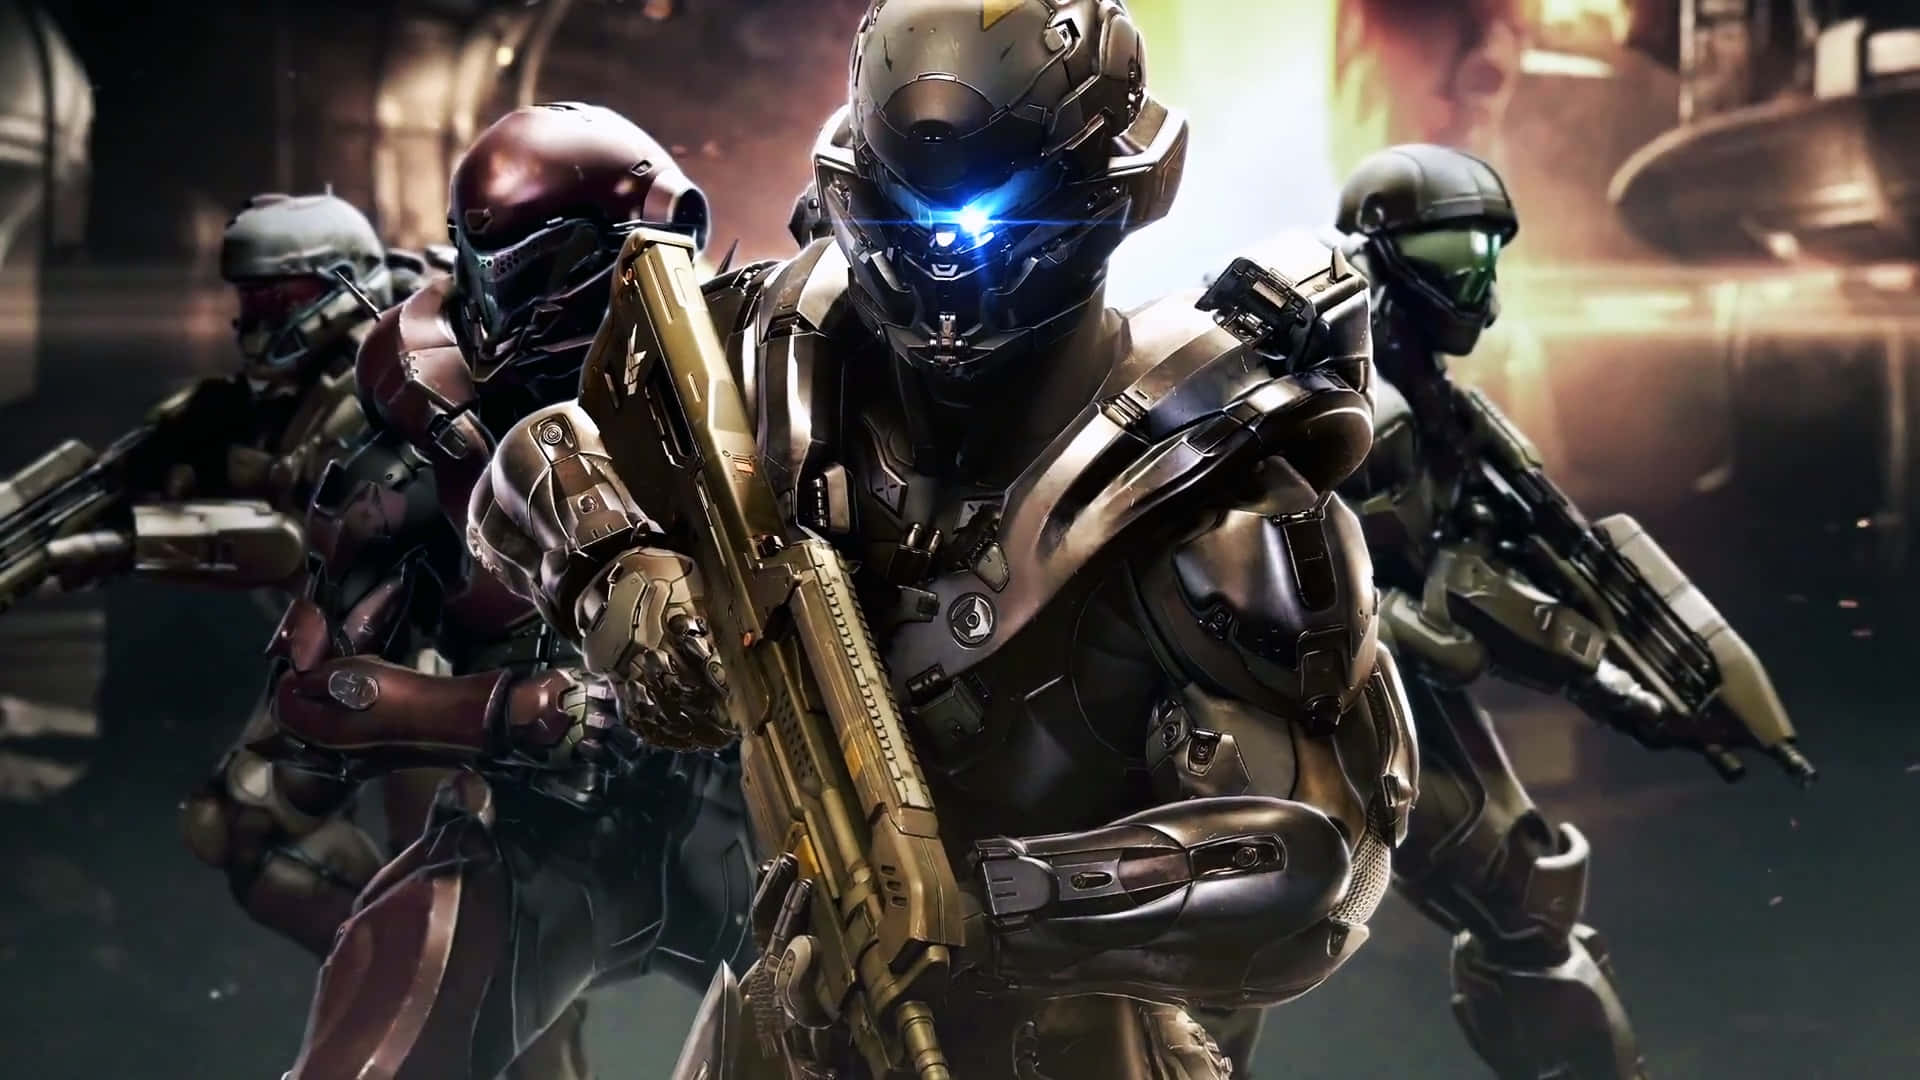 United in Battle - Halo Spartans Ready for Action Wallpaper